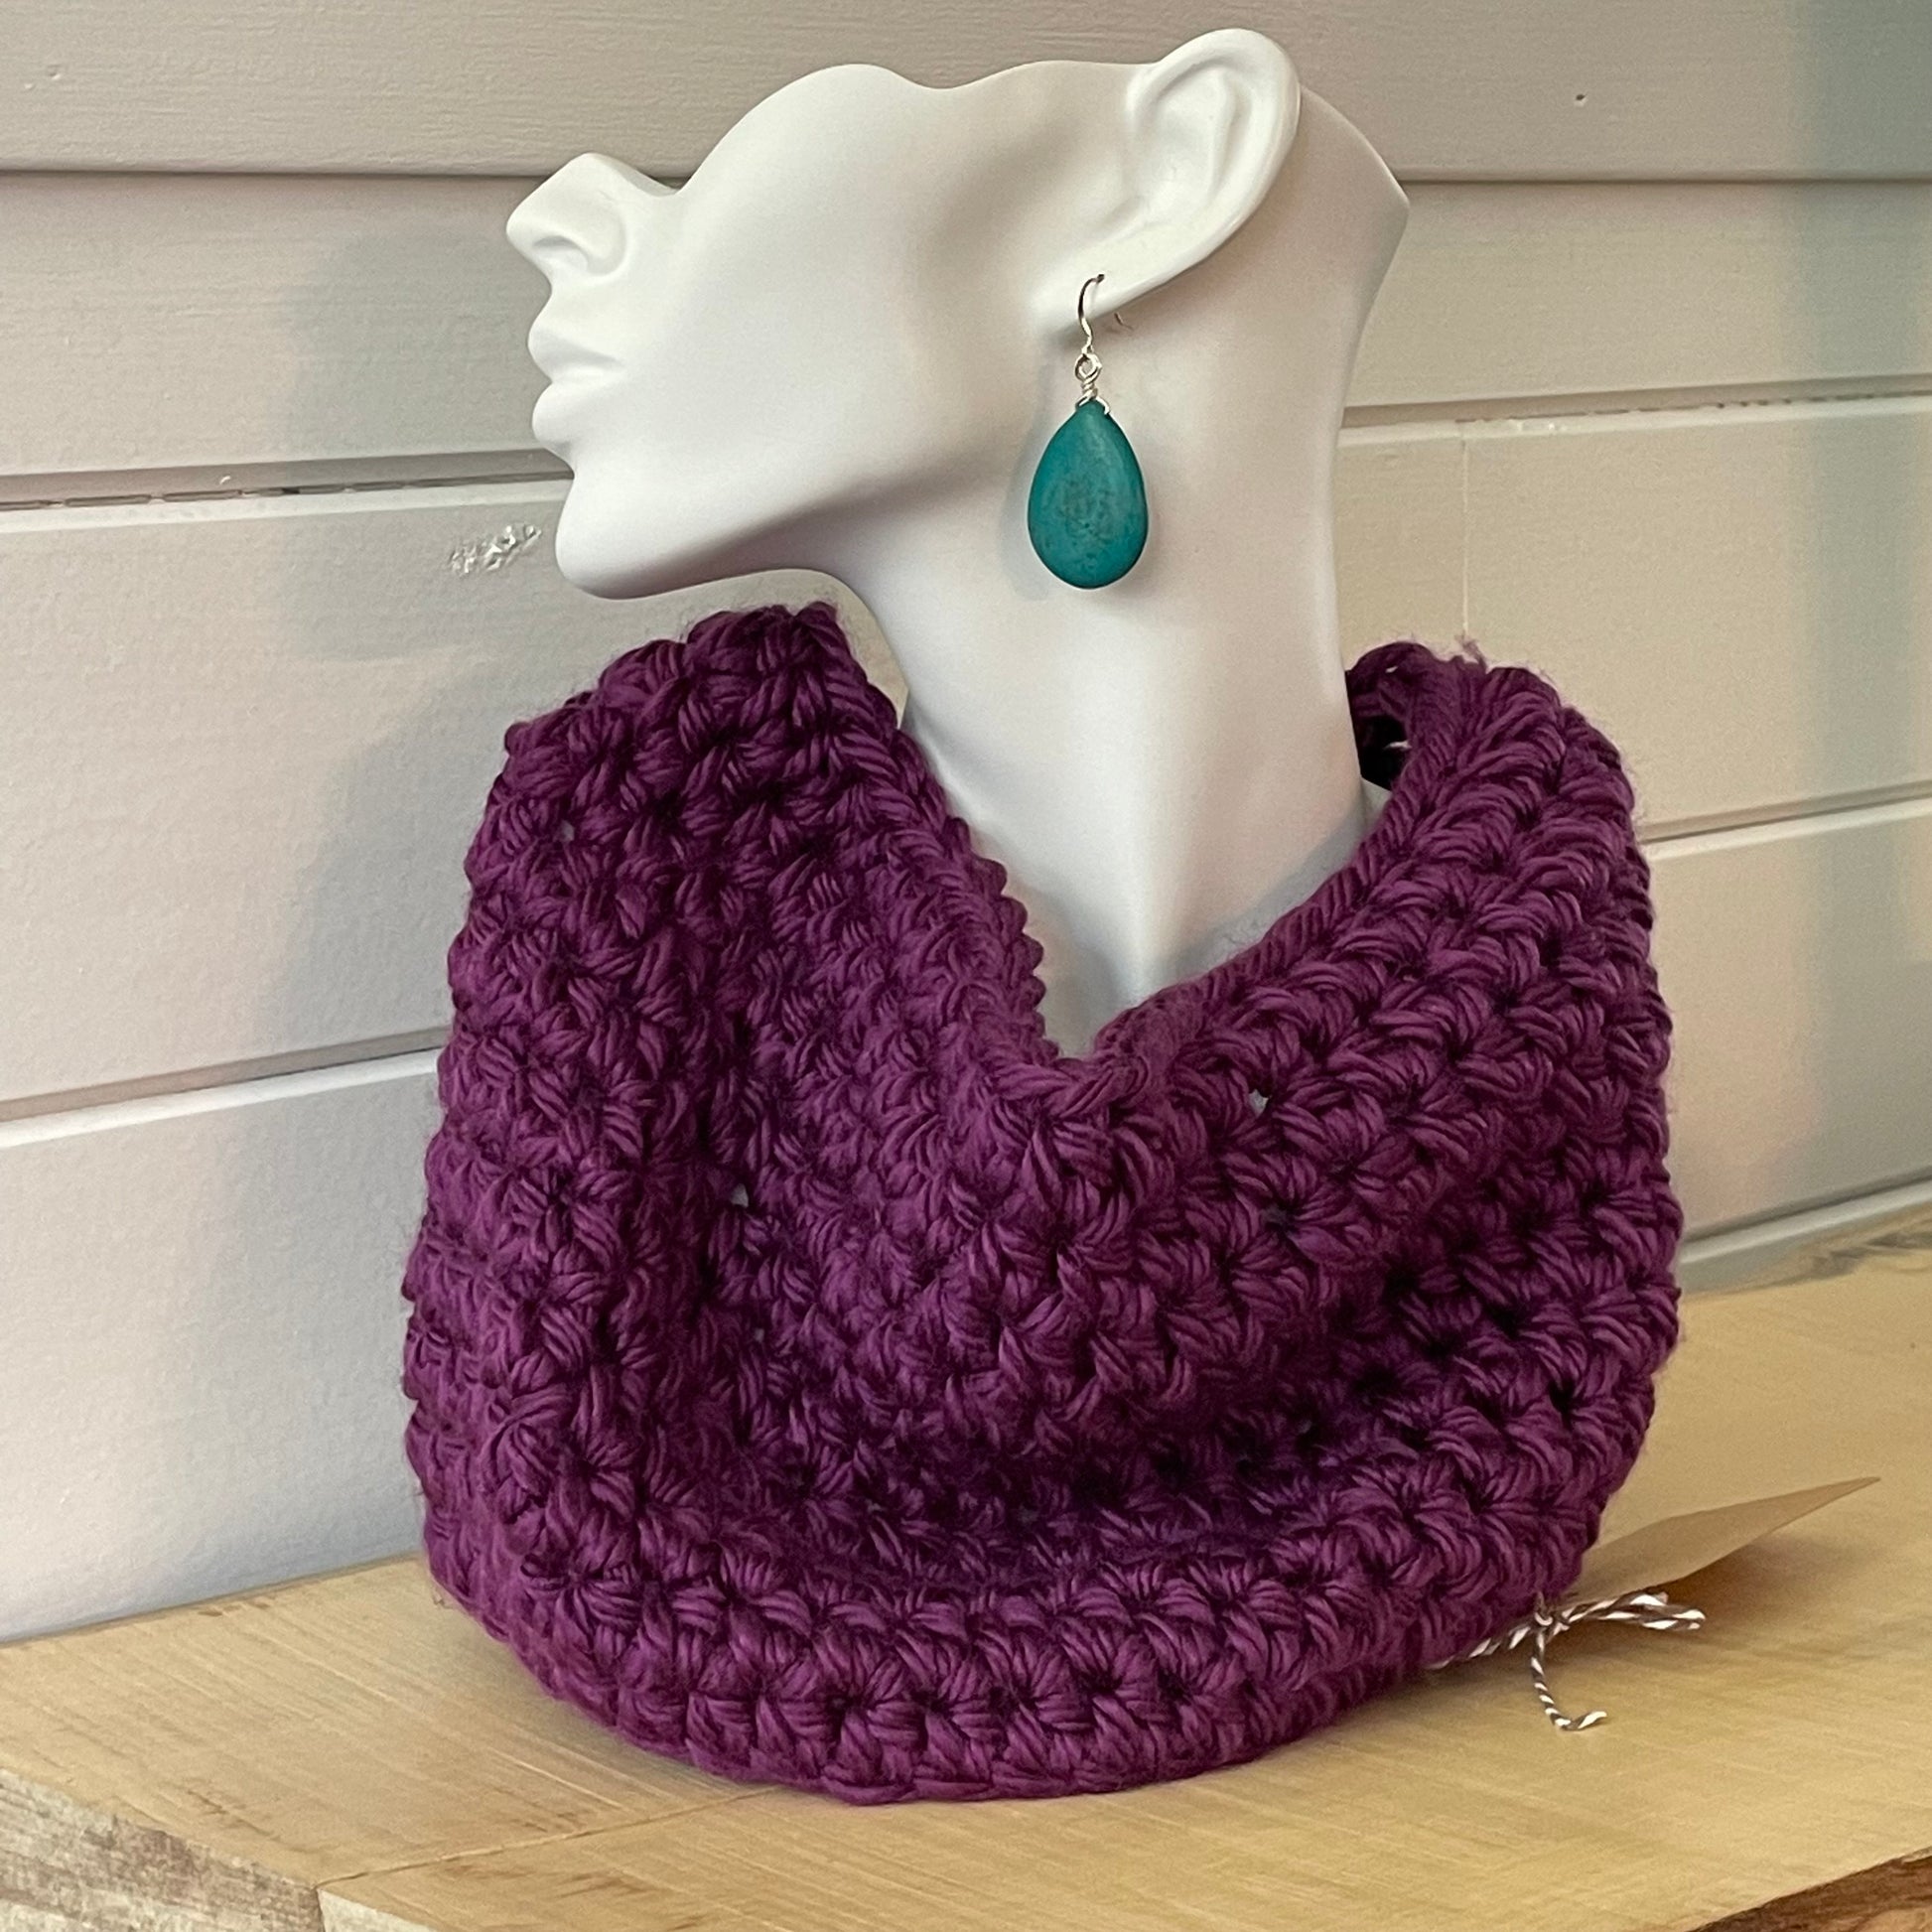 Hand Crocheted Deep Plum Cowl Scarf 11" Unisex Men's Women's Knit Accessory Infinity Scarves Outdoor Fall Winter